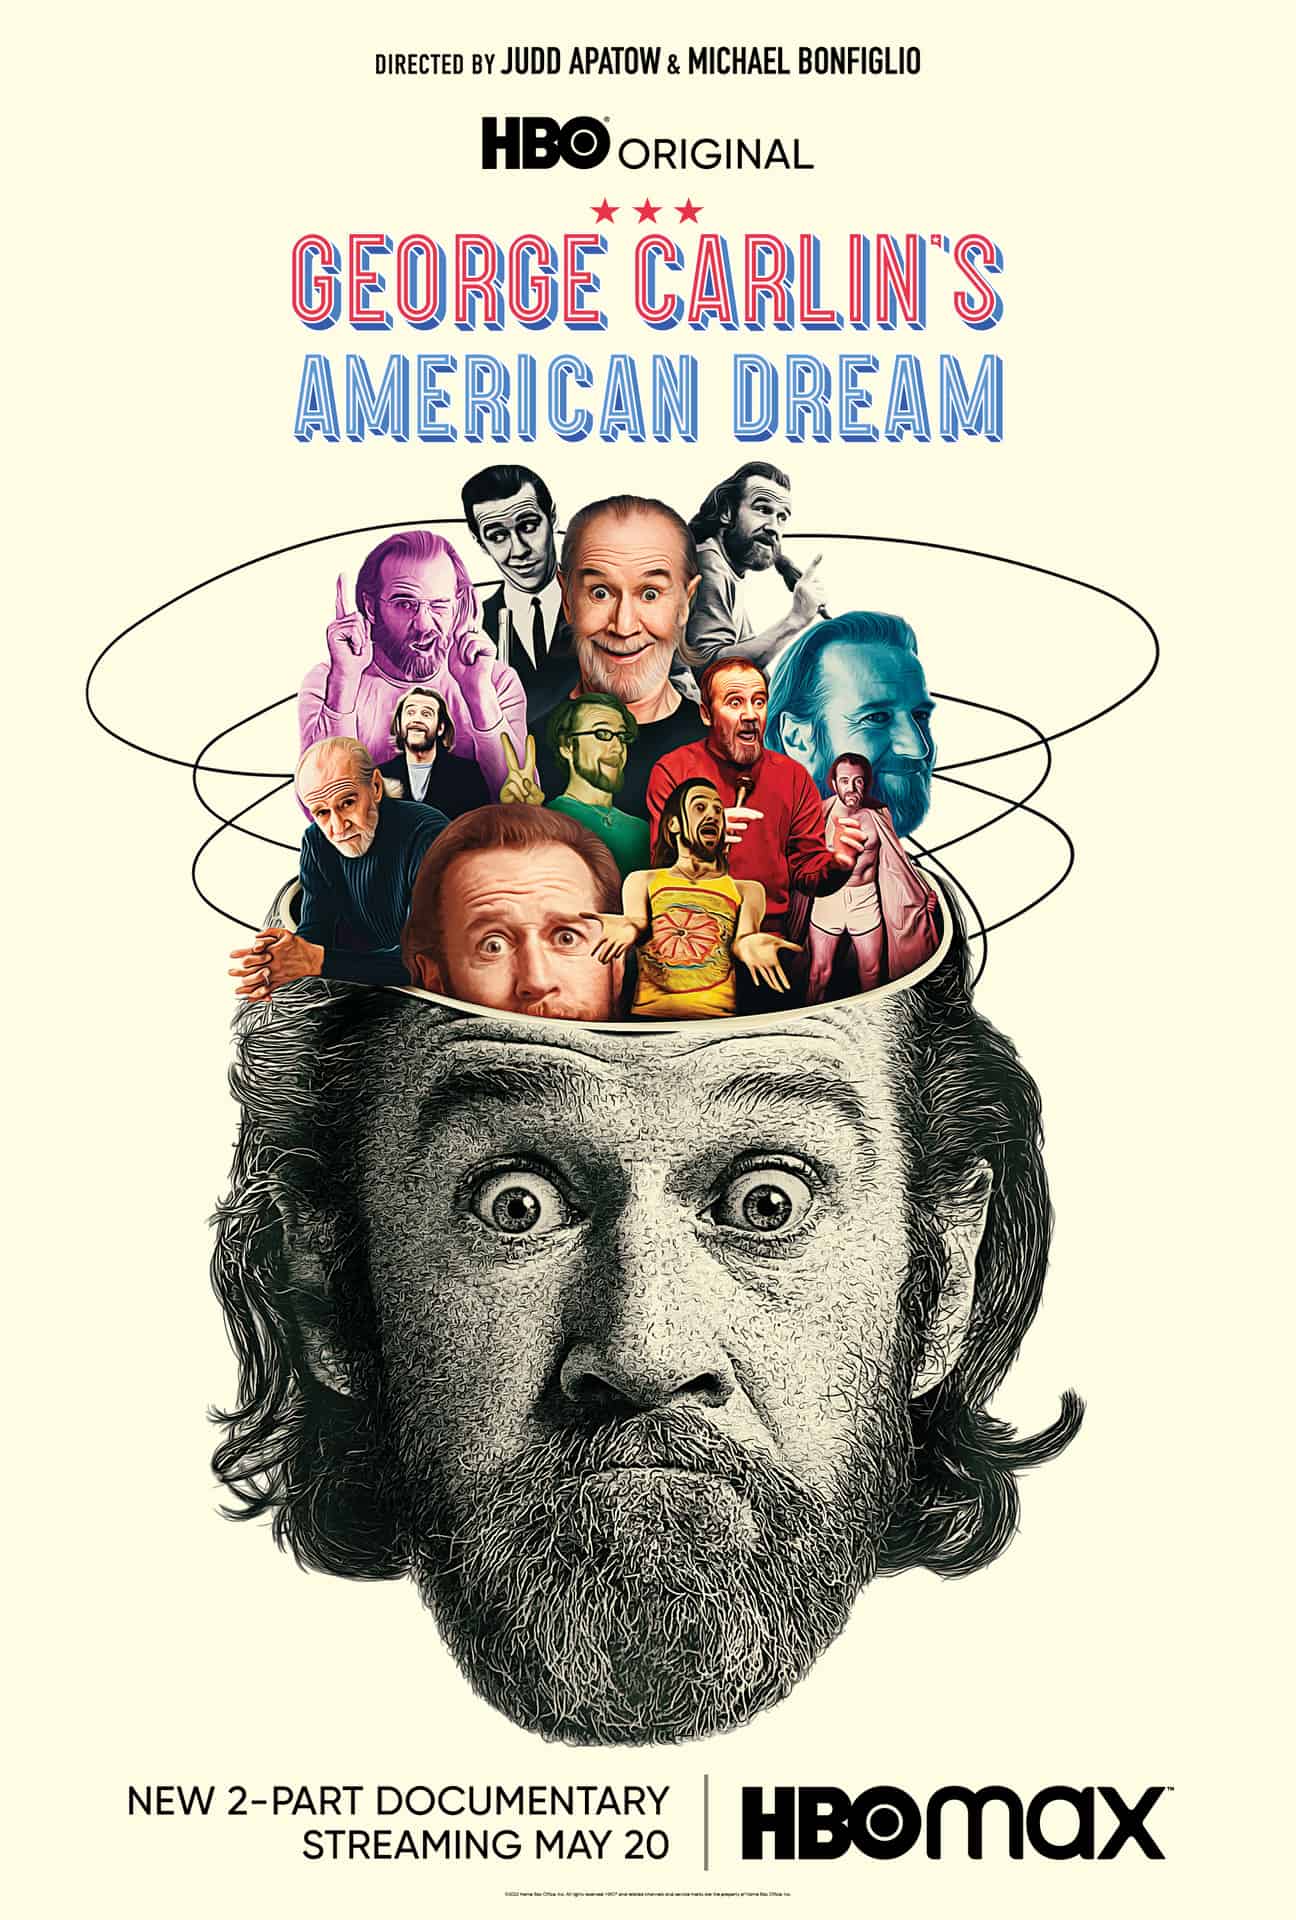 George Carlin's American Dream begins streaming on HBO MAX on Friday May 20th 1